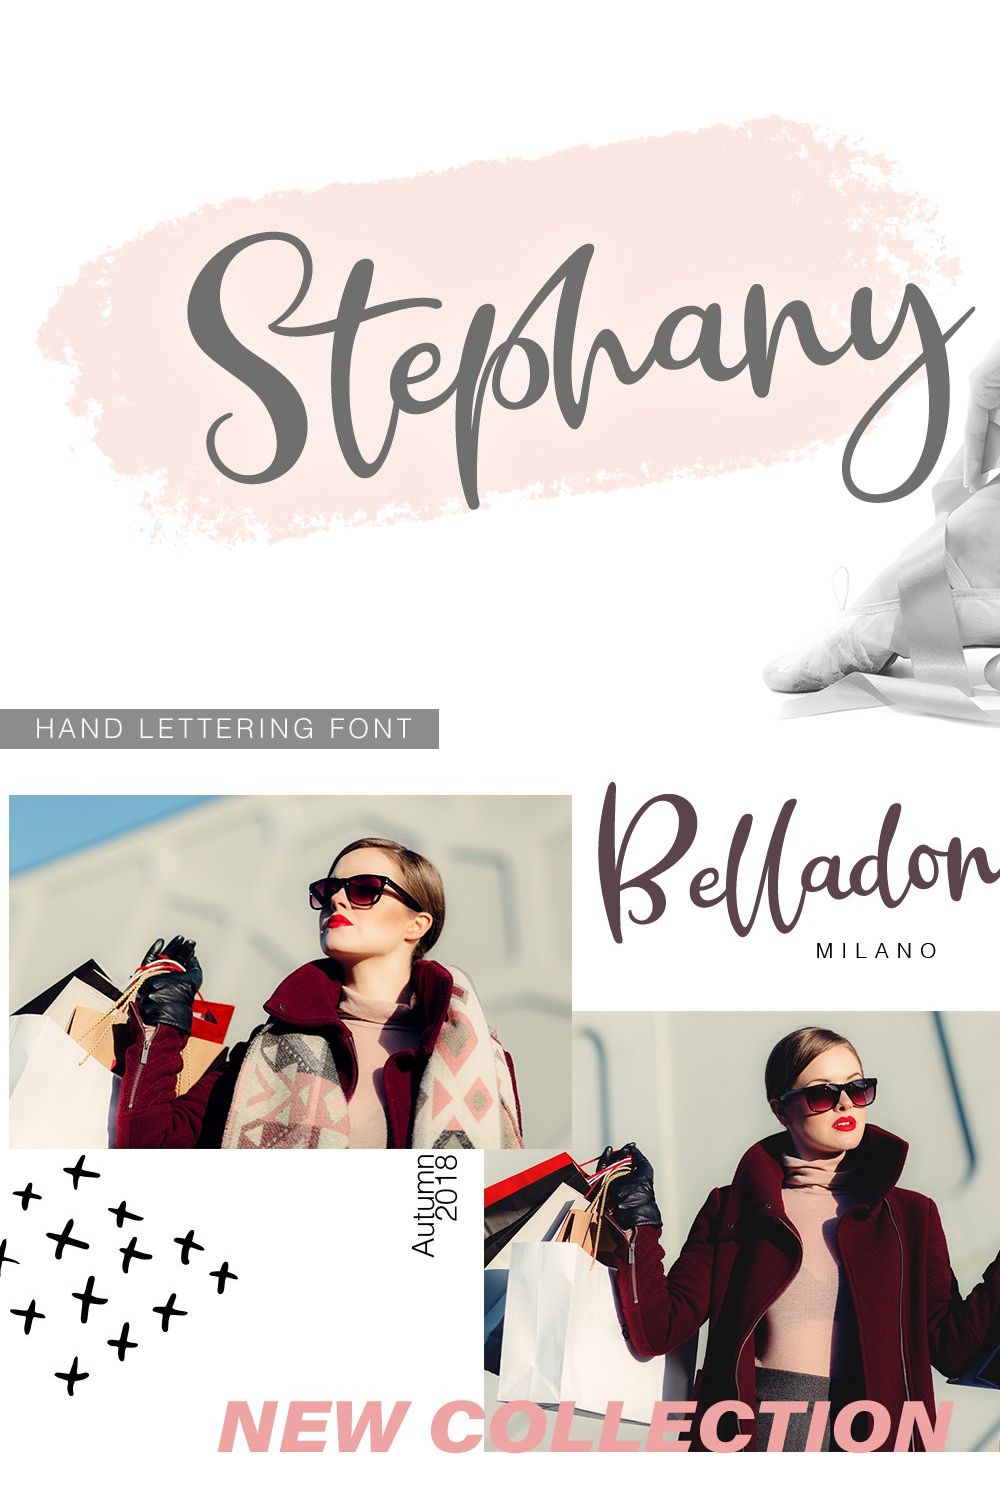 Stephany pinterest preview image.